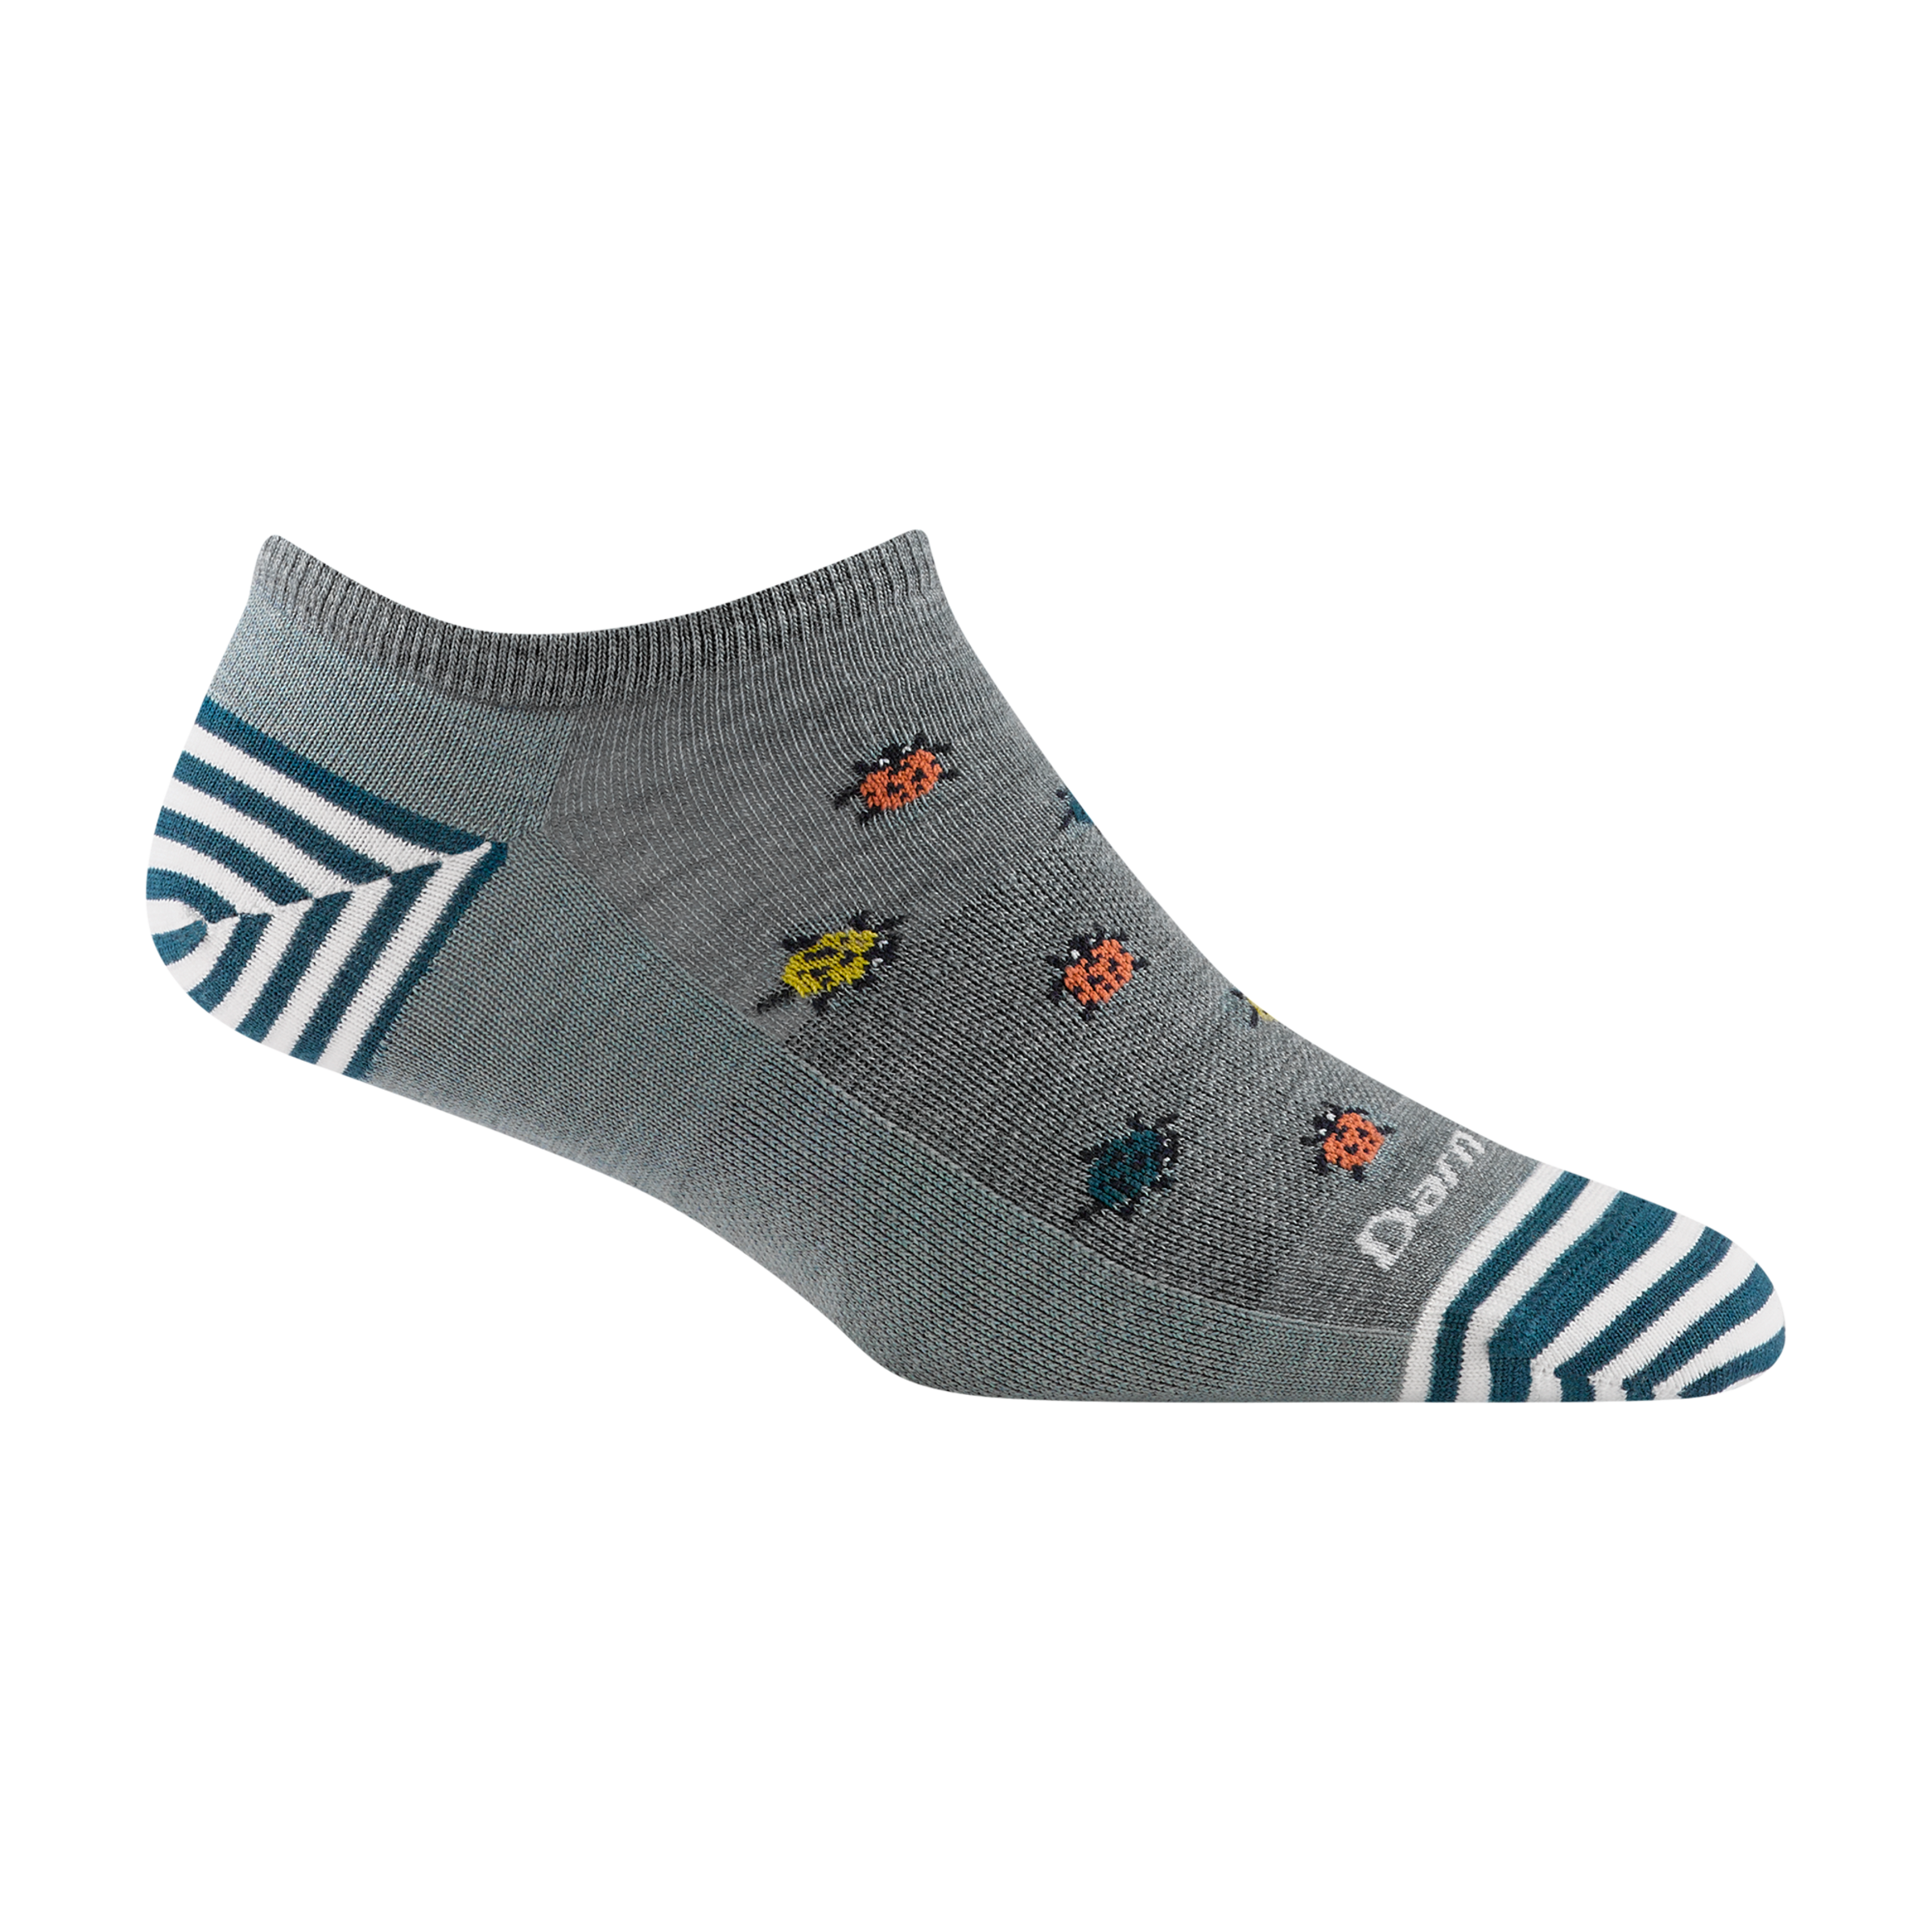 6074 women's lucky lady no show lifestyle sock in seafoam with teal and white striped accents and orange lady bugs